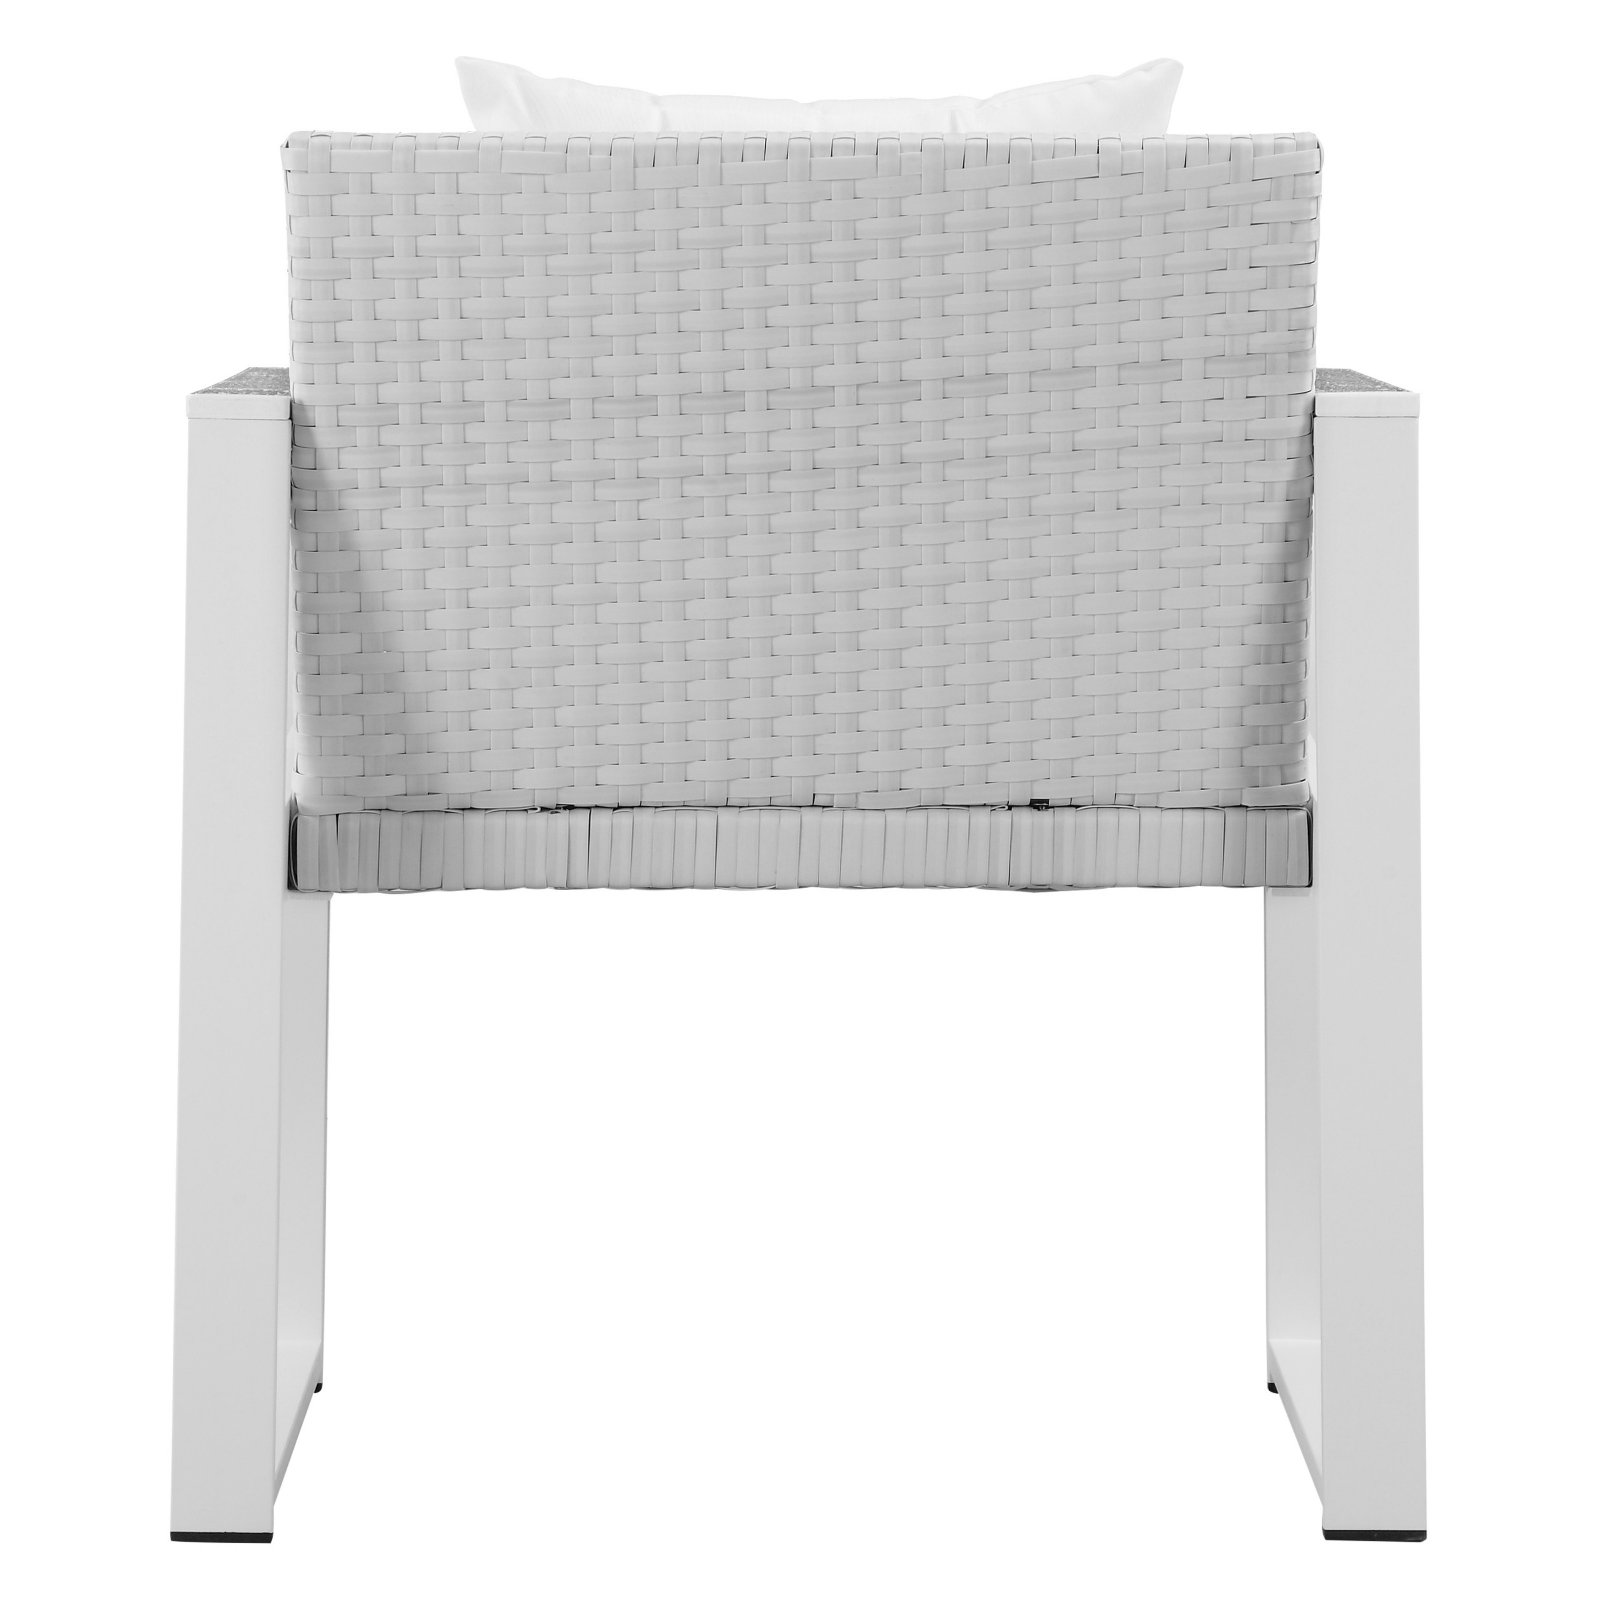 Pangea Home Chester Patio Lounge Chair - image 4 of 11